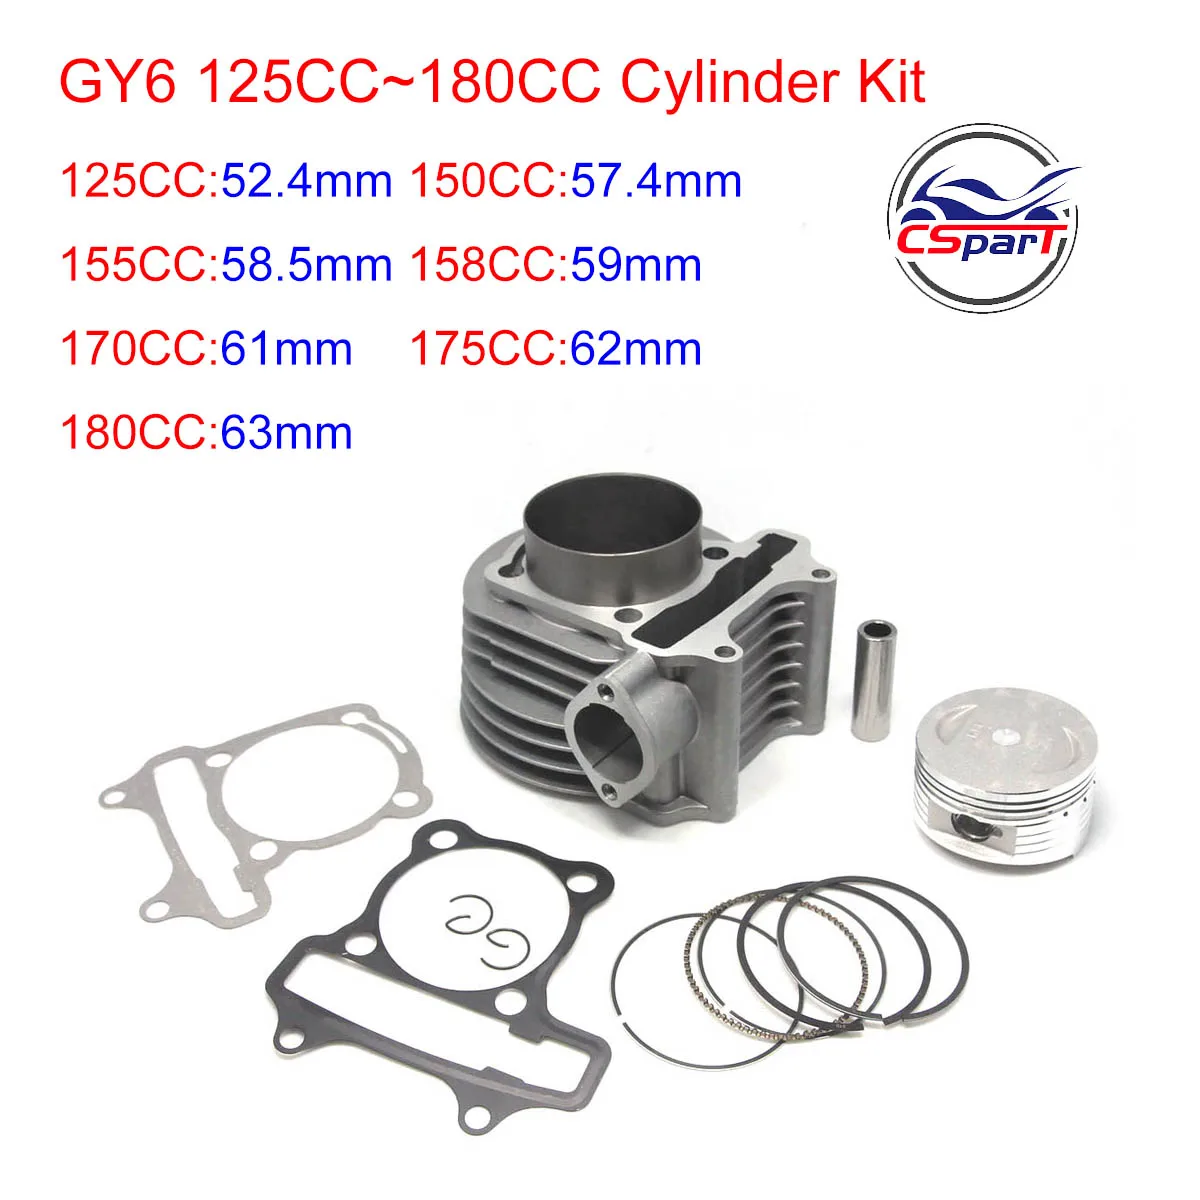 

GY6 125CC 150CC 155CC 158CC 170CC 175CC 180CC 52.4mm 57.4mm 58.5mm 59mm 61mm 62mm 63mm Cylinder kit Big Bore Scooter ATV Buggy